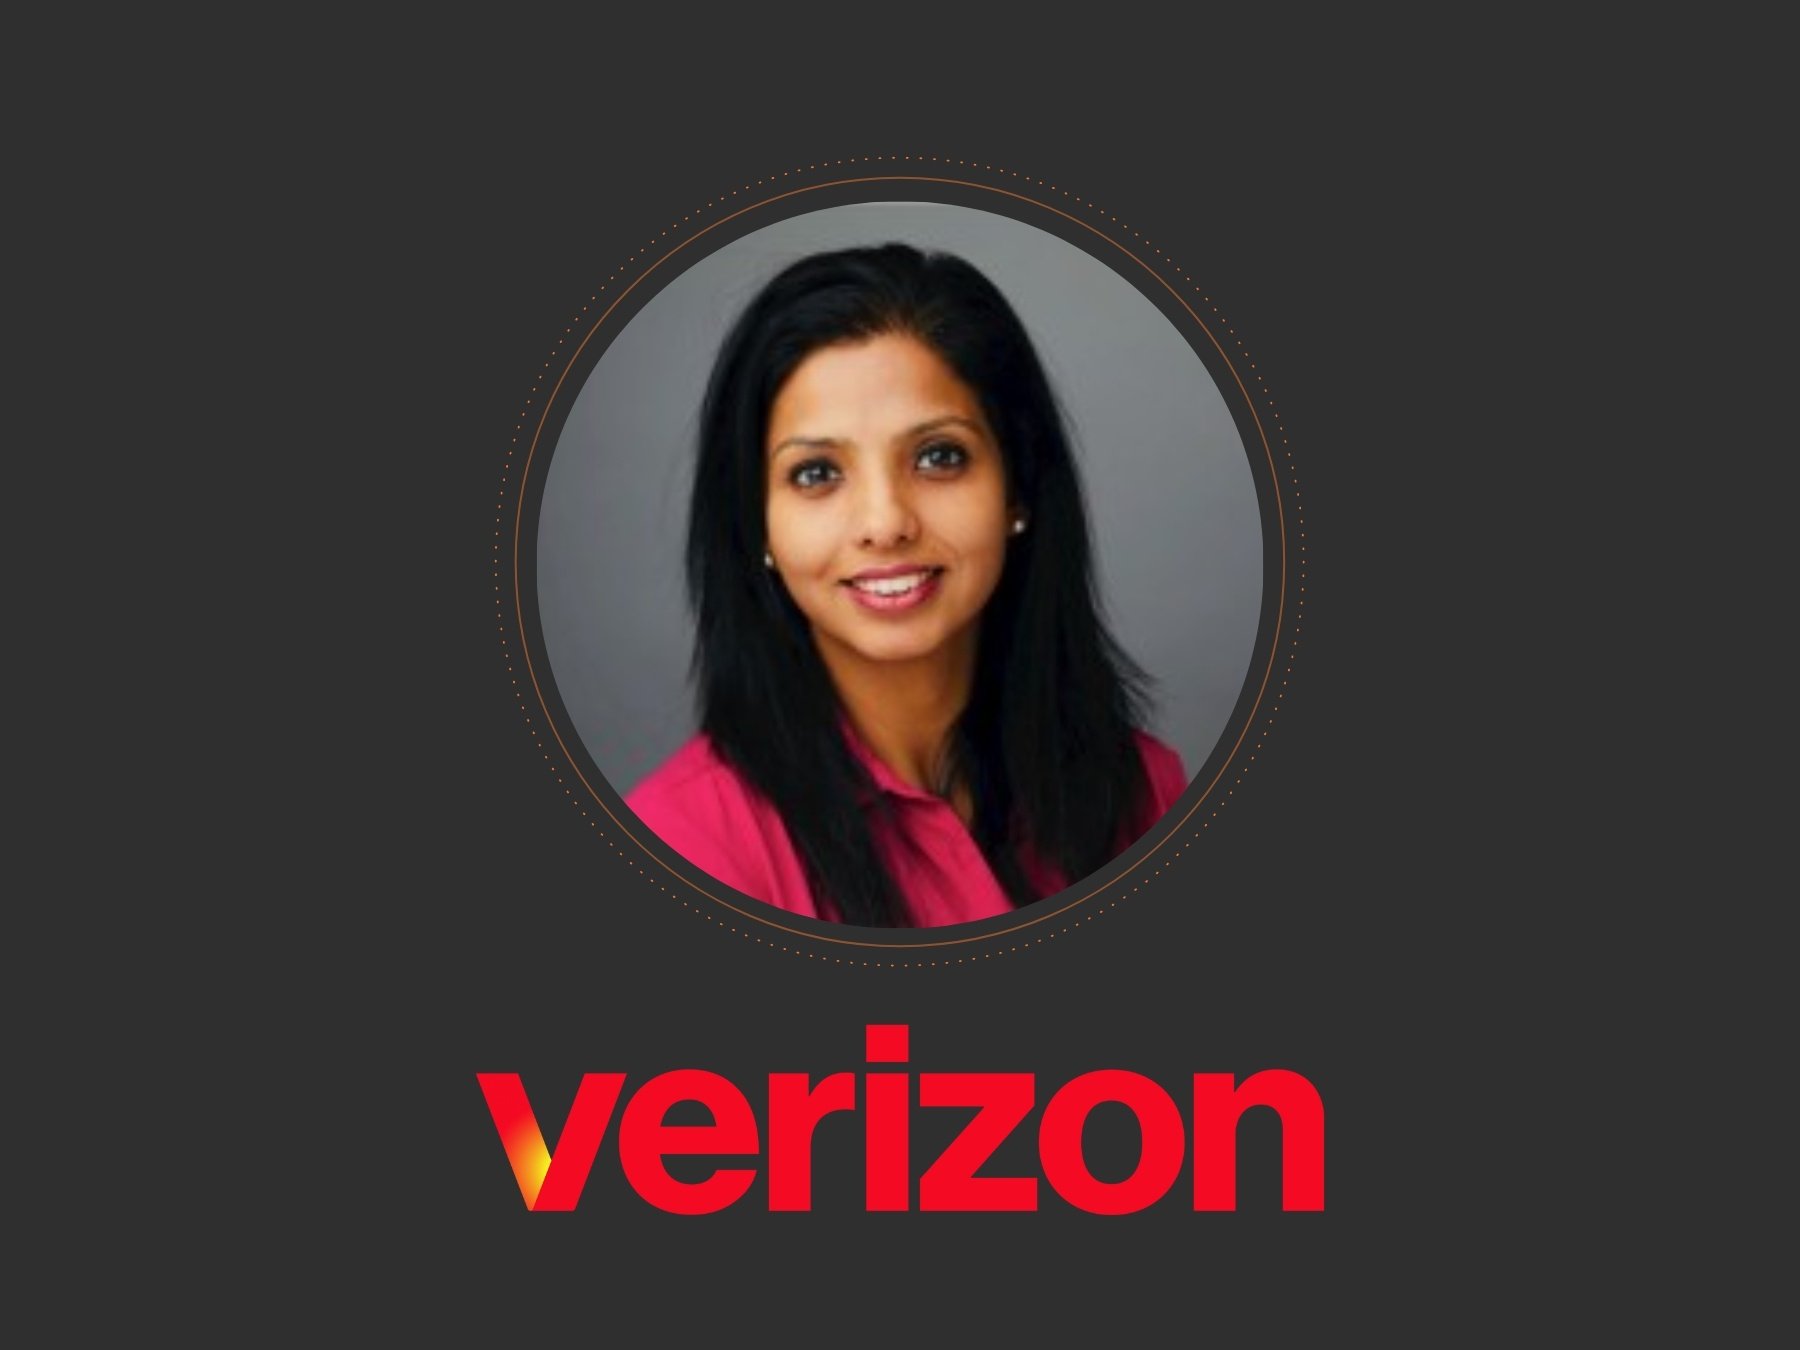 Enhancing network resilience: Interview with Verizon